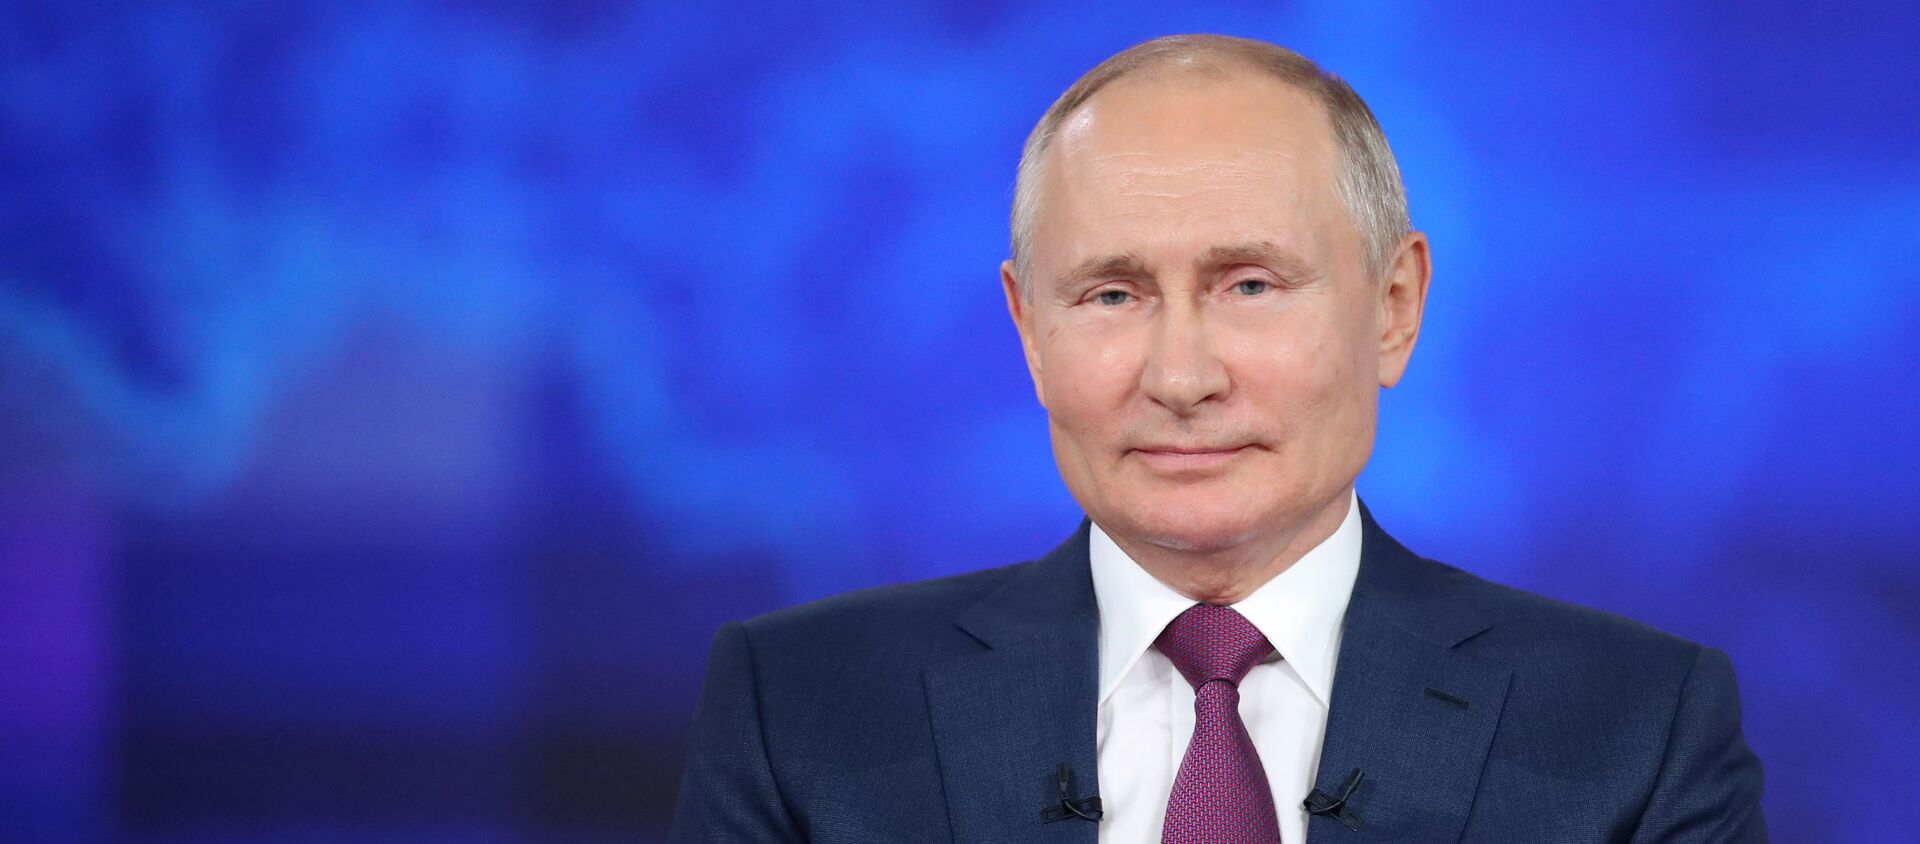 Russian President Vladimir Putin takes part in an annual nationwide televised phone-in show in Moscow, Russia June 30, 2021. - Sputnik International, 1920, 21.07.2021